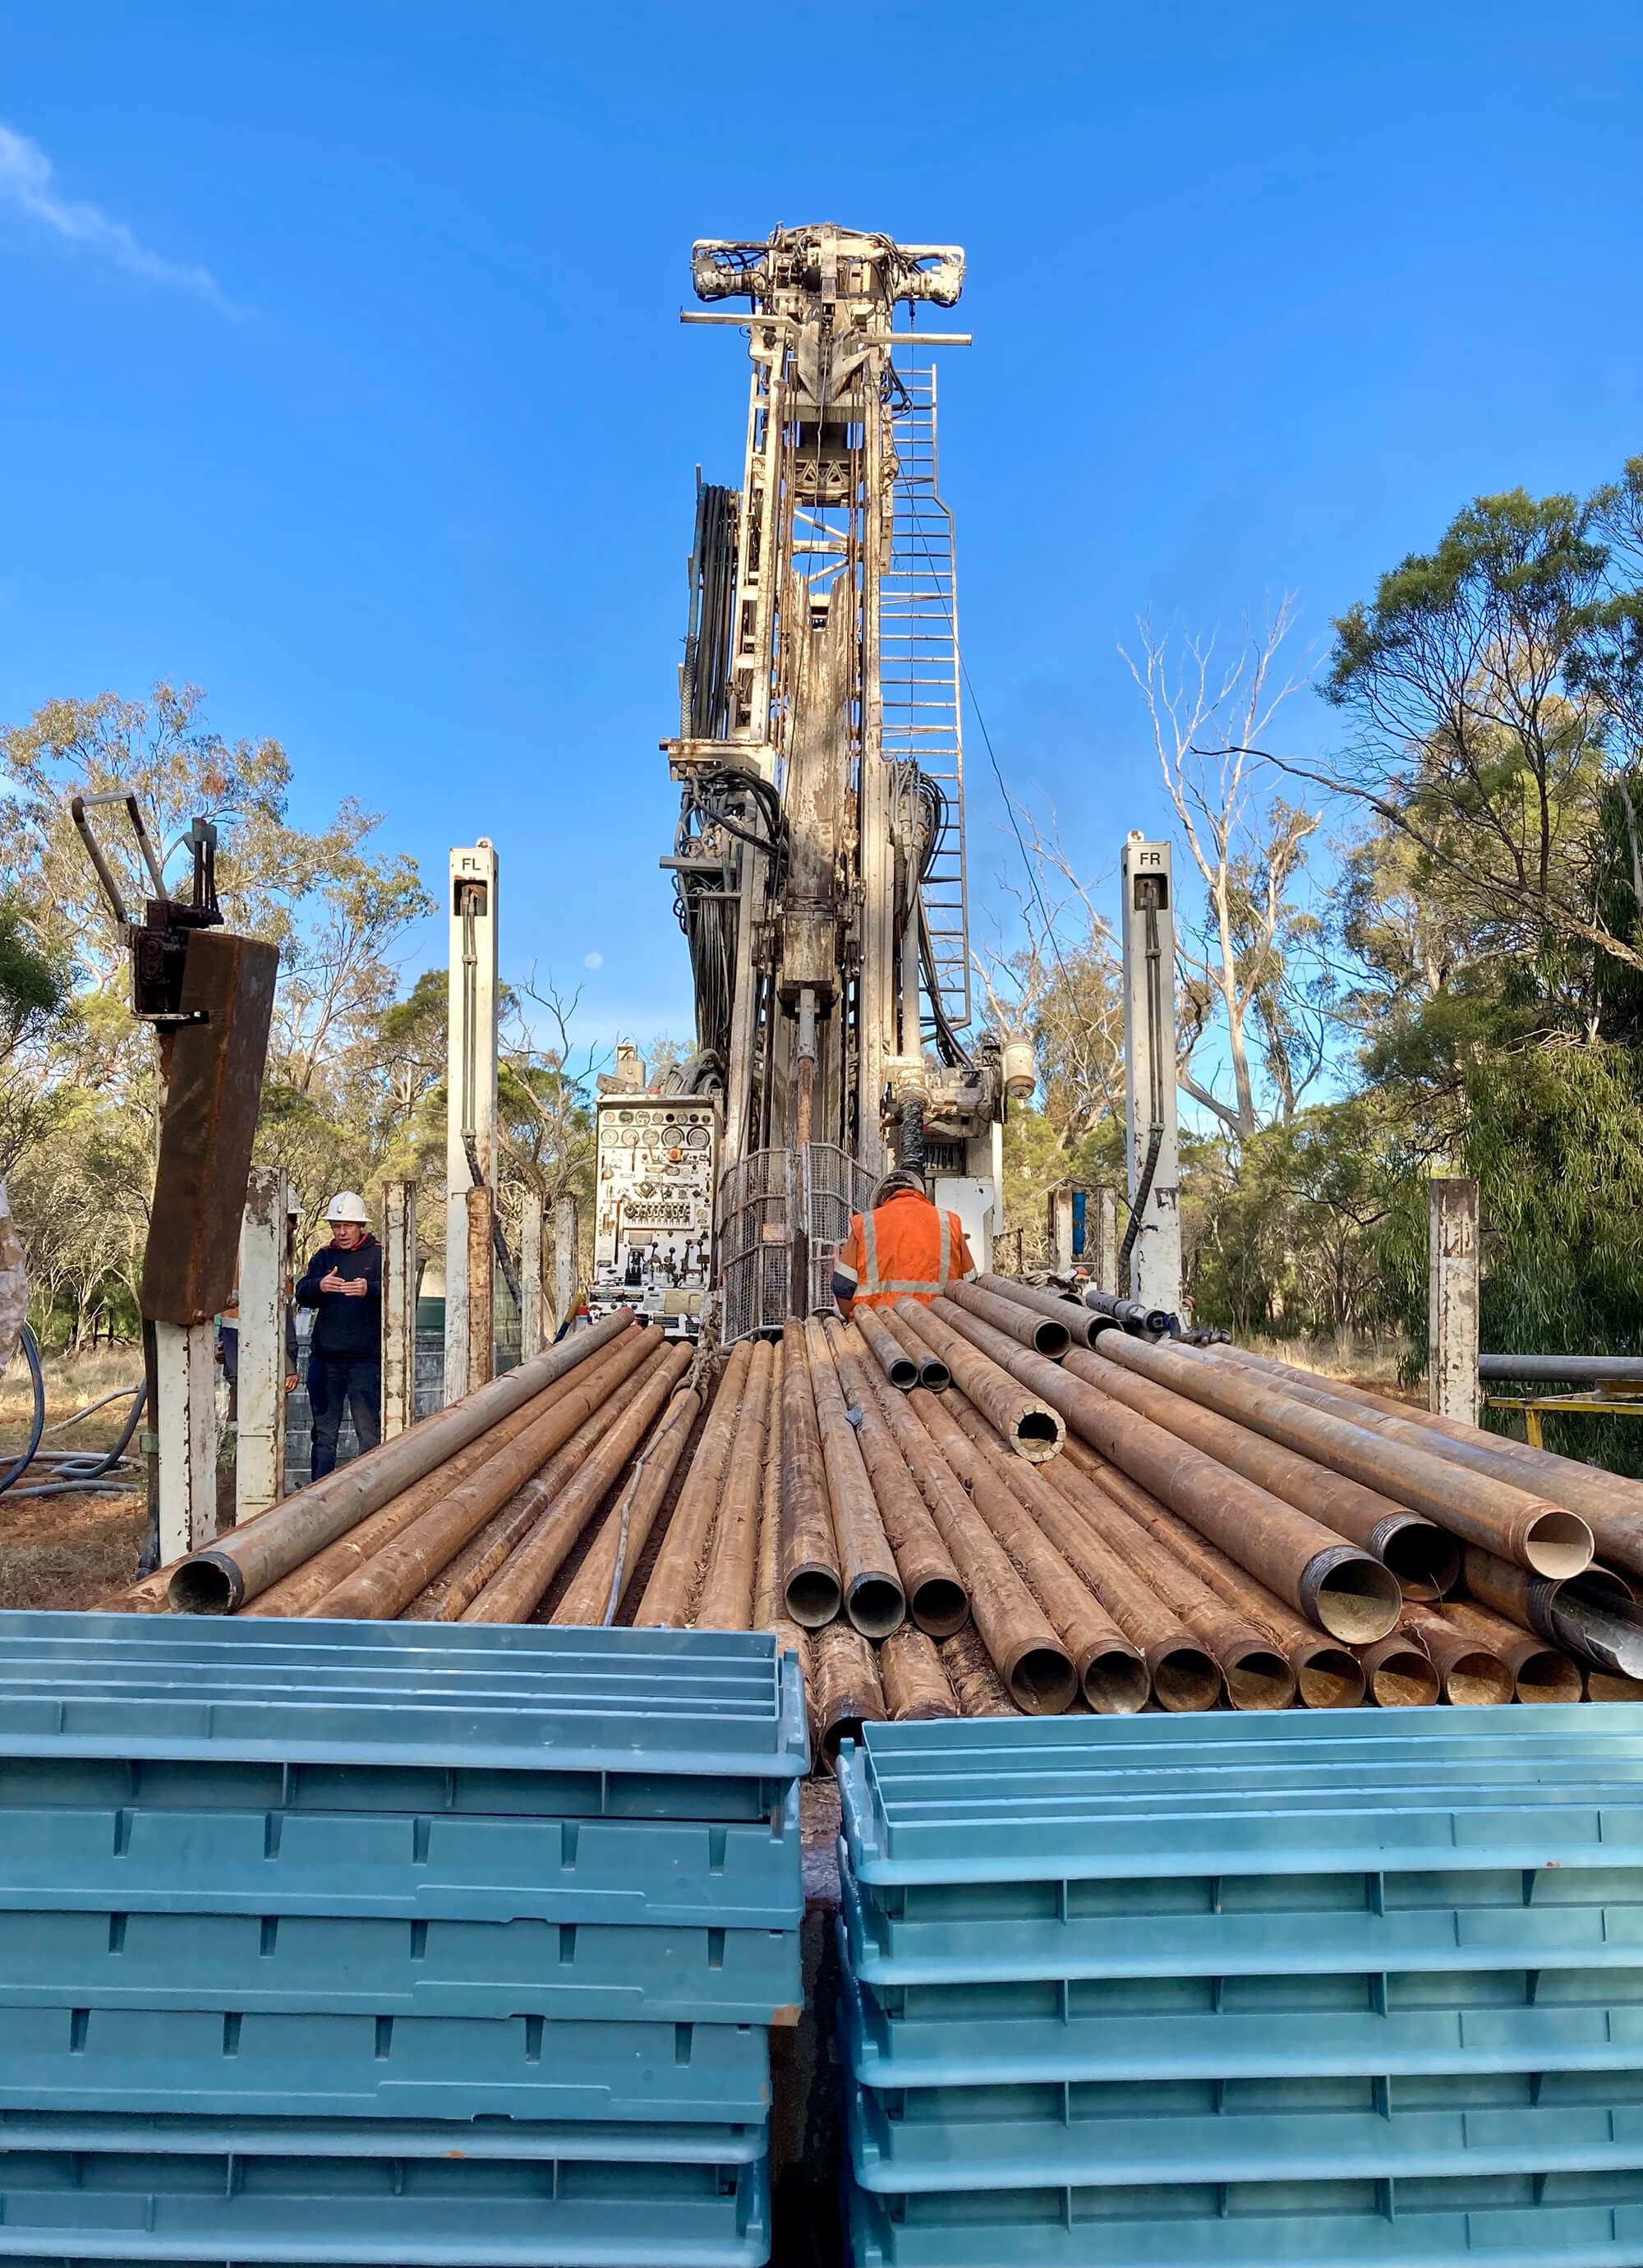 Diamond drilling at Jack's Lookout